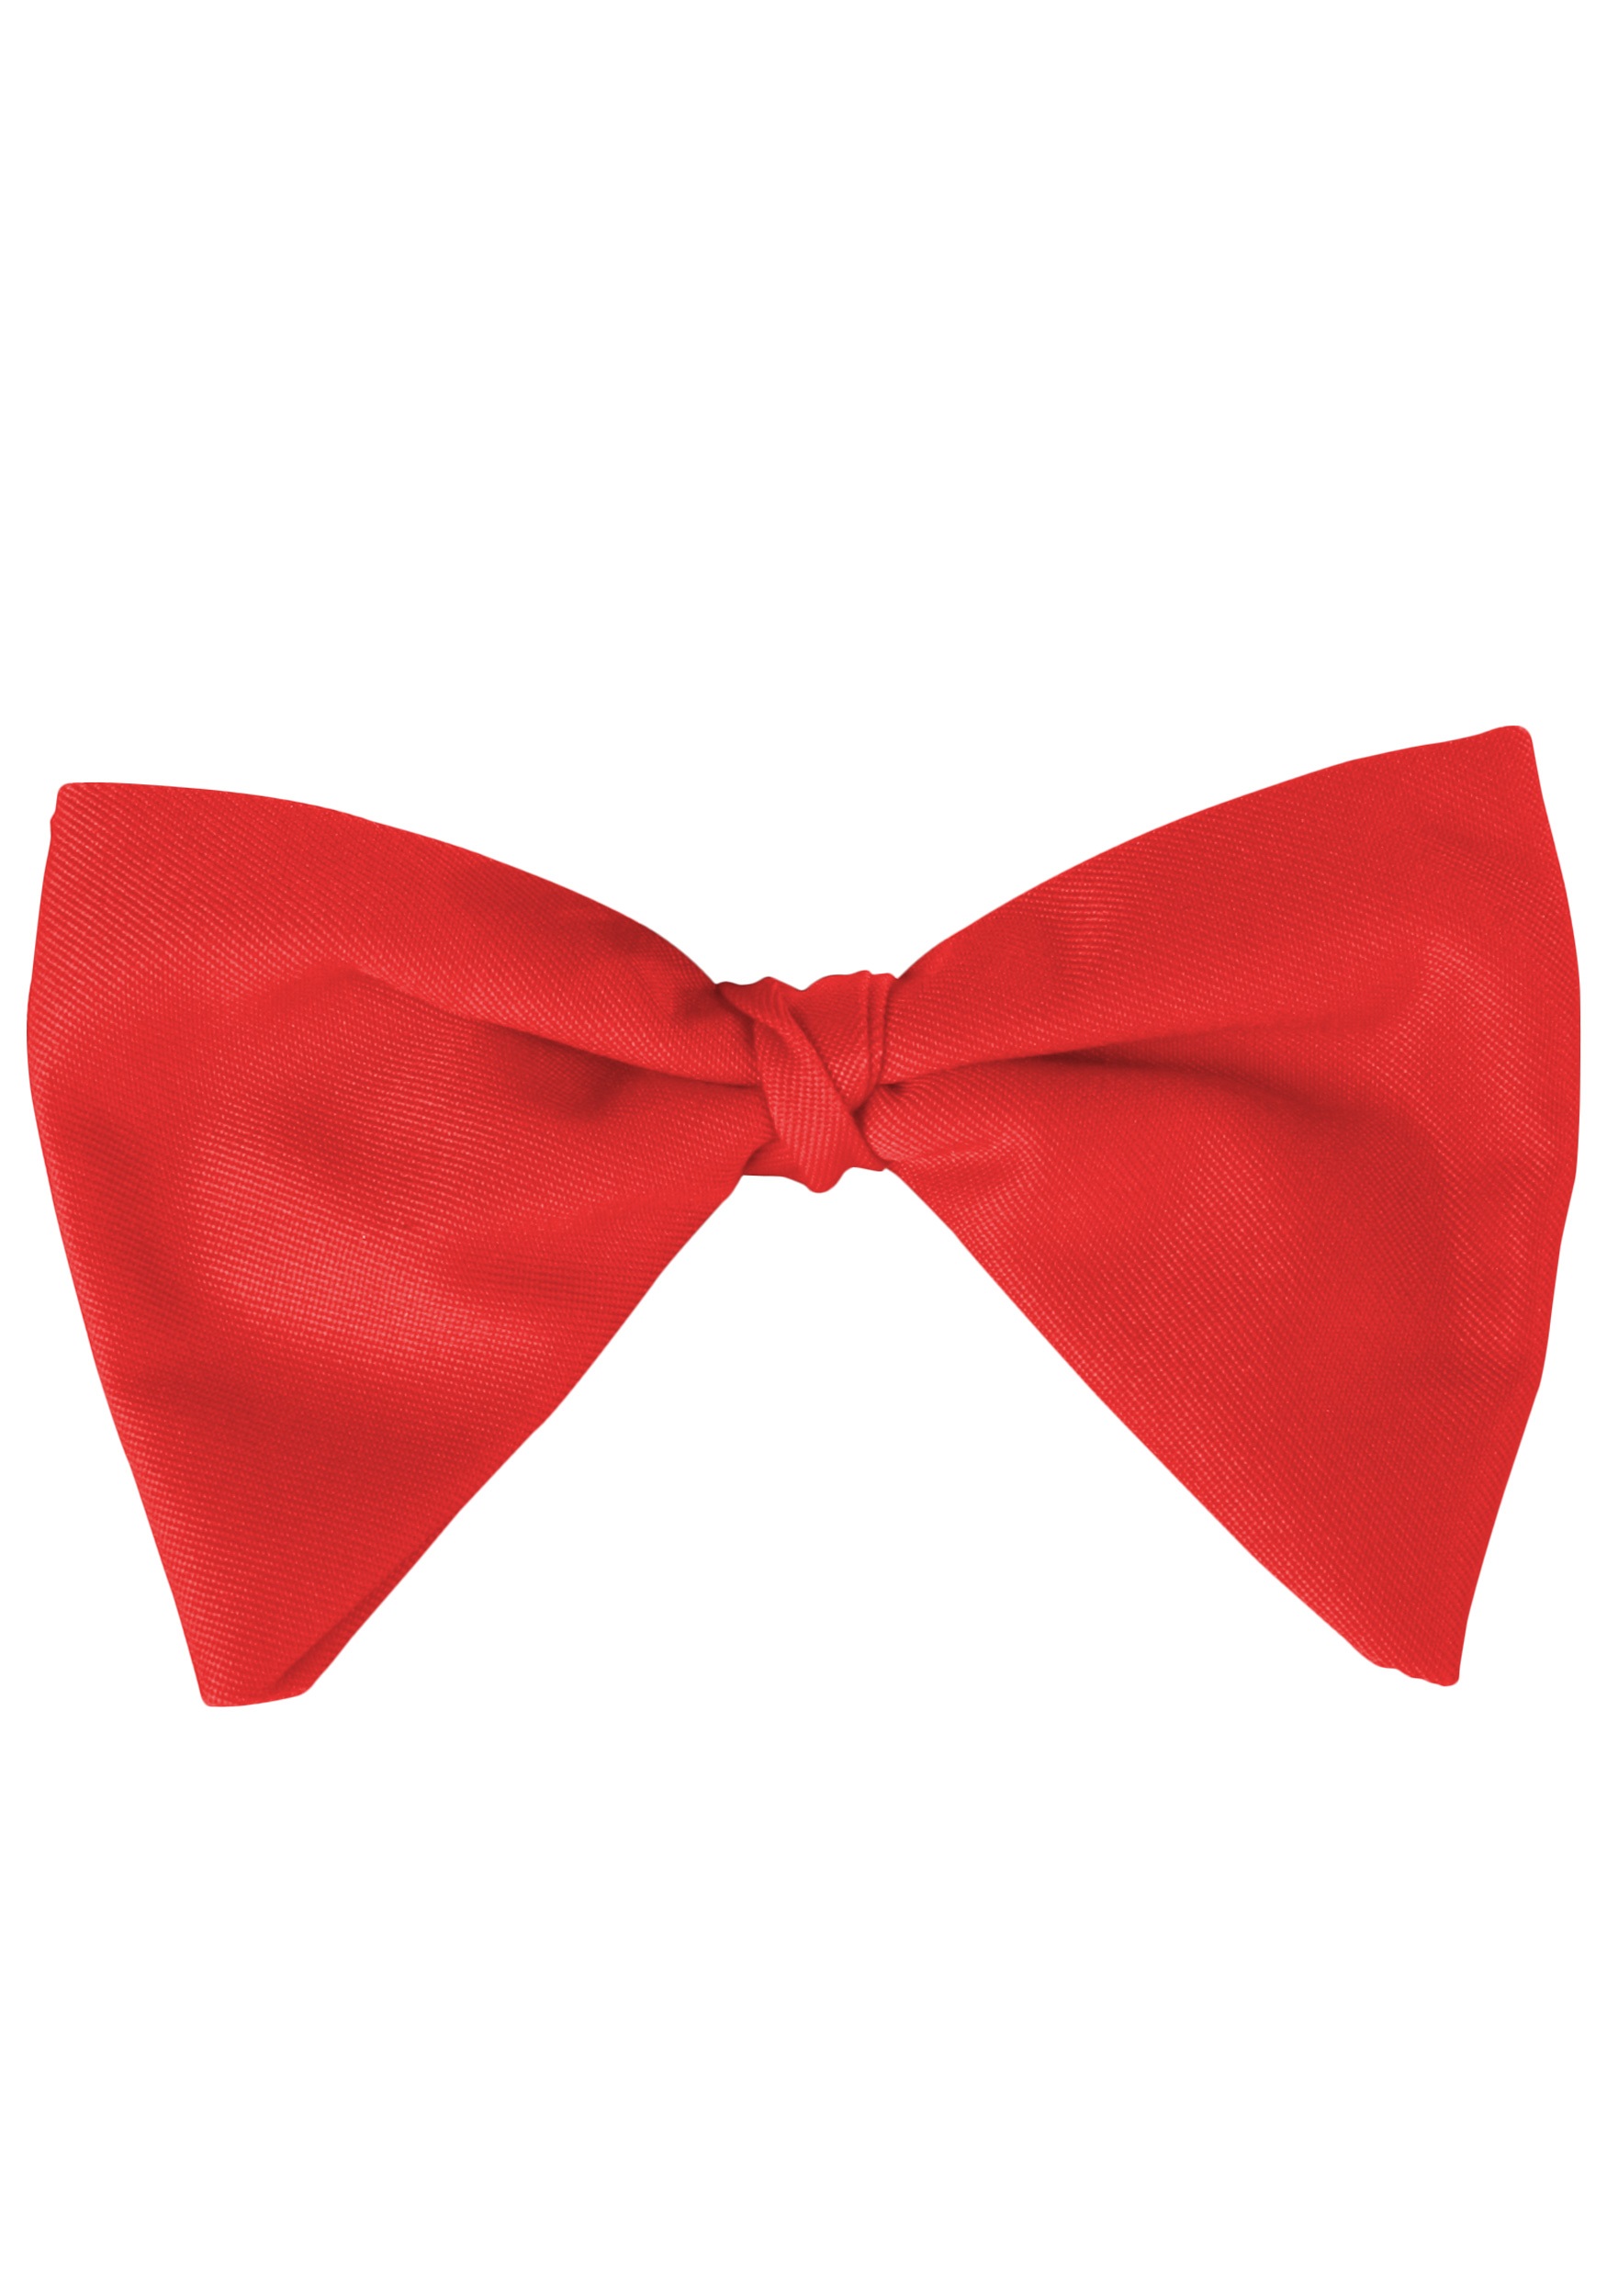 Red Bow Tie - Bow Ties for Prom